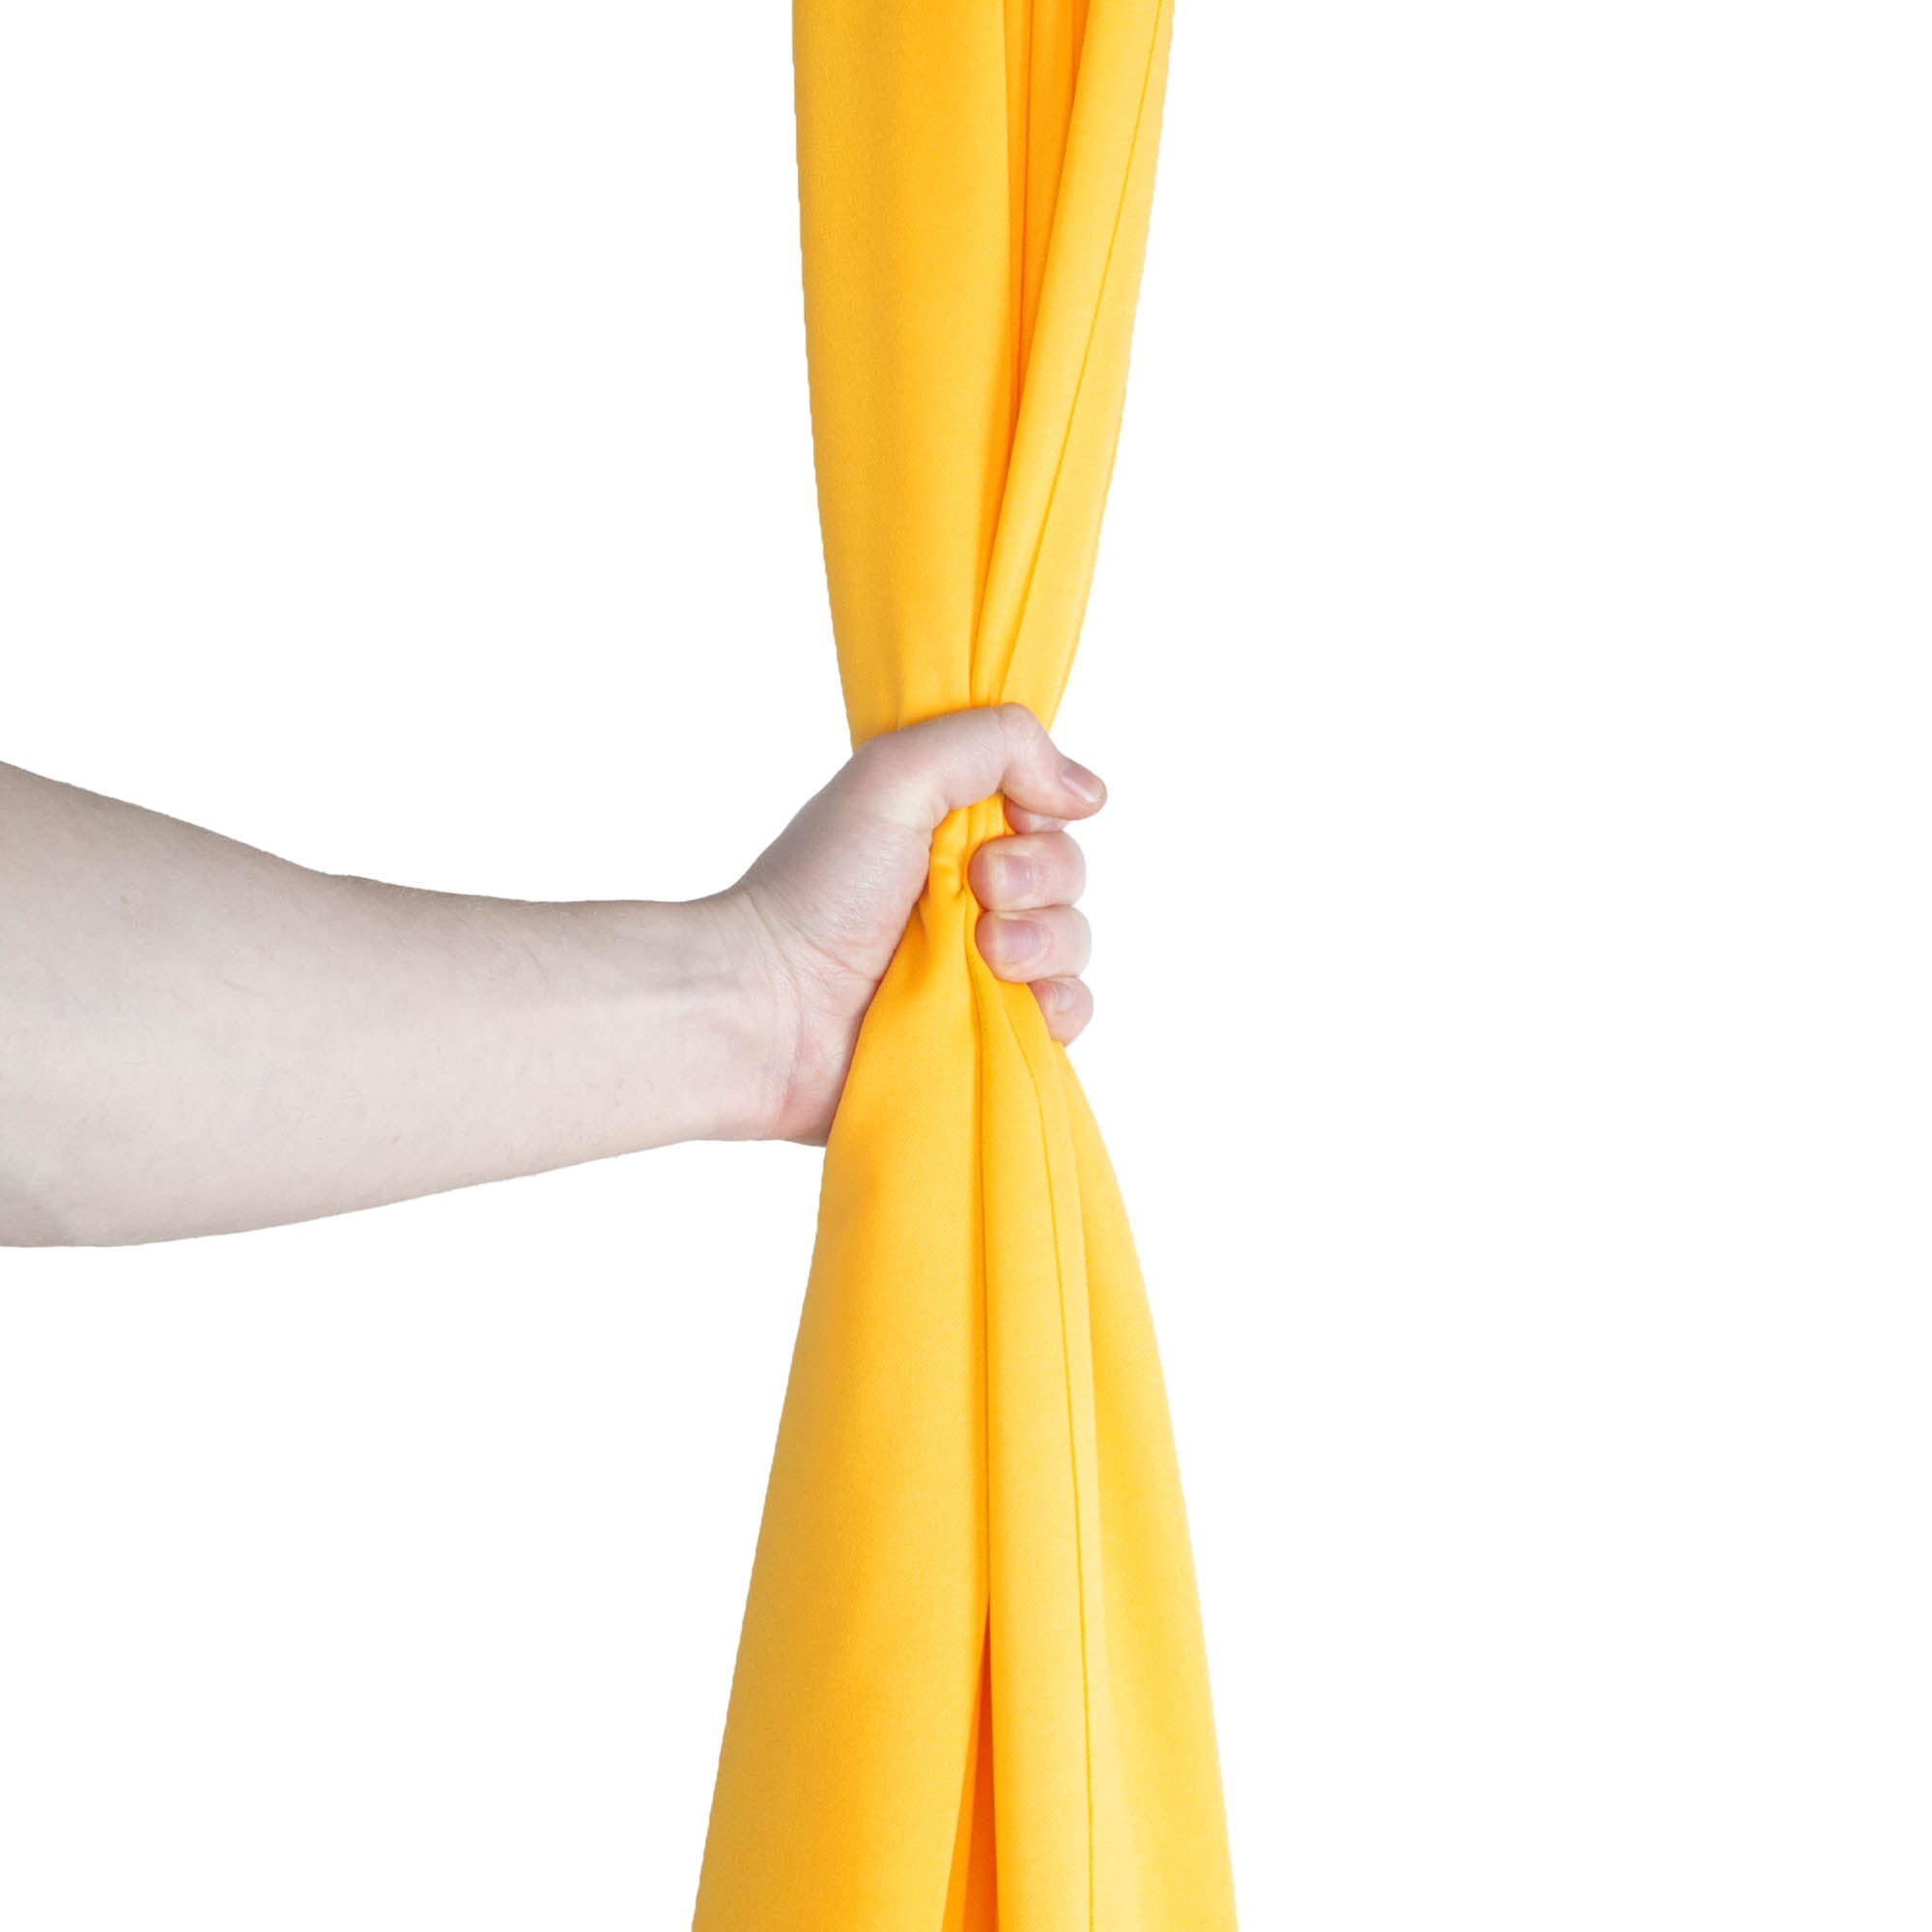 Firetoys youth aerial silk golden yellow in hand